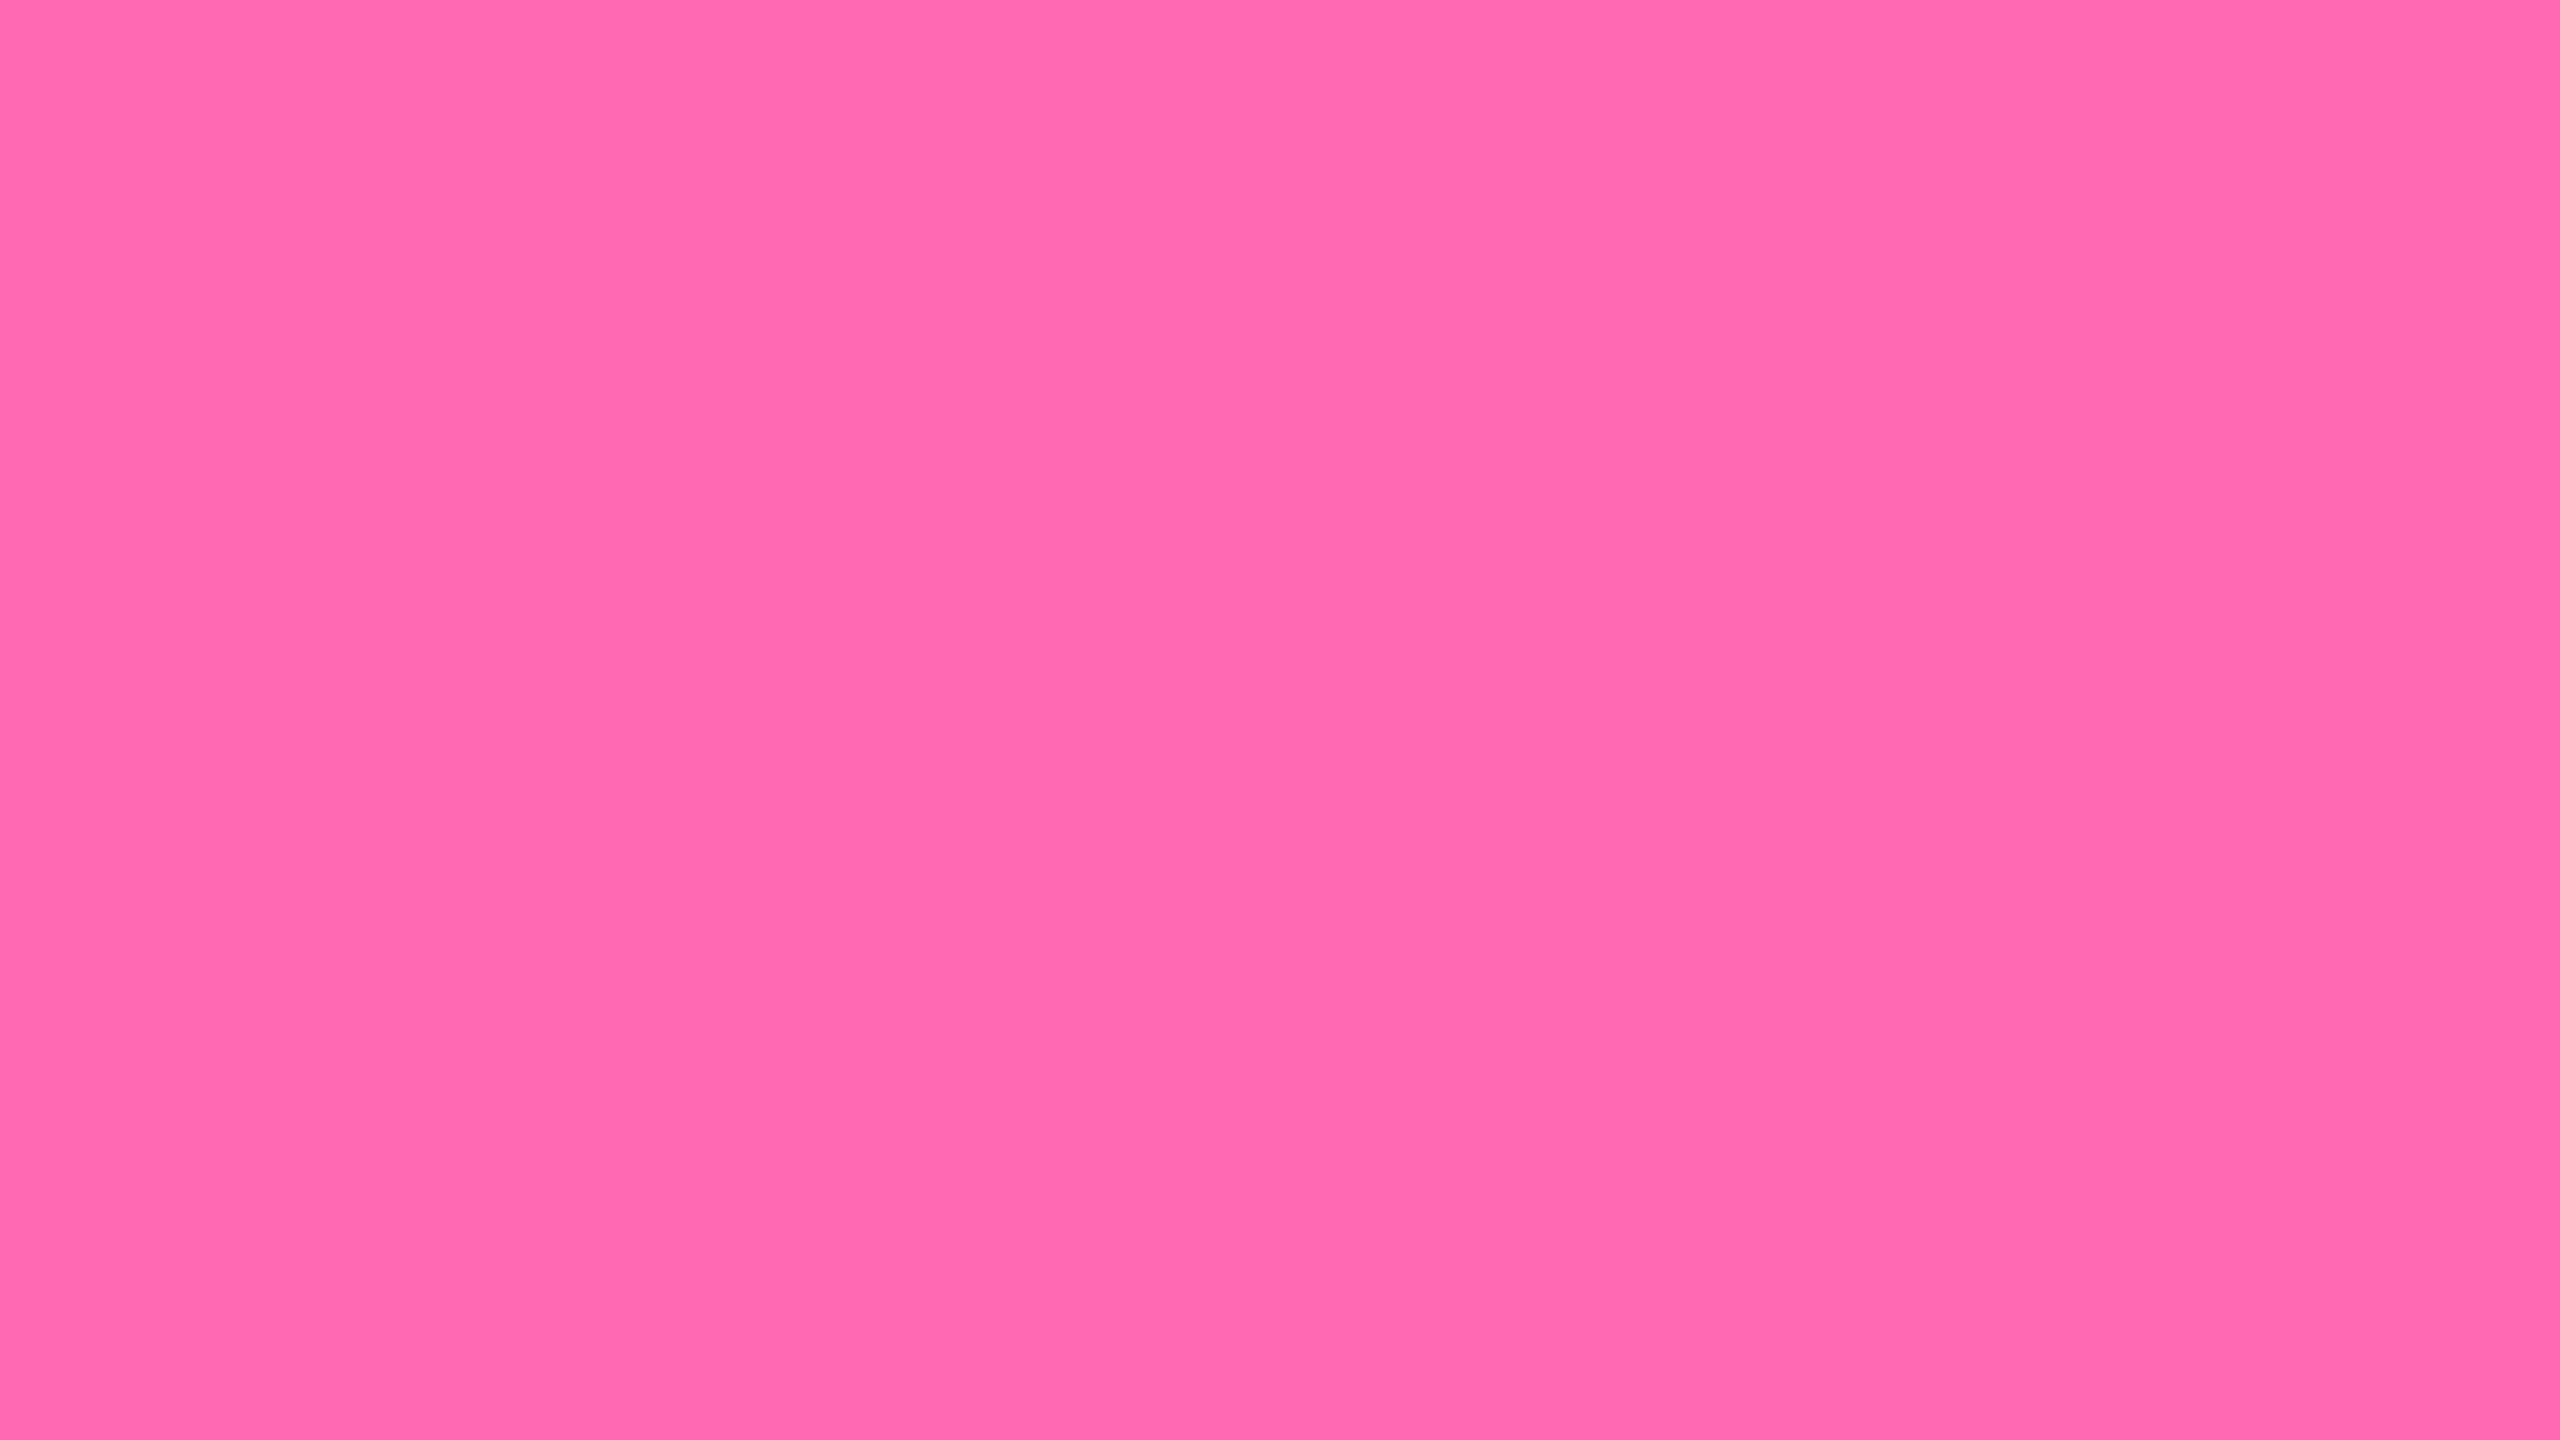 1123400 color pink background 2560x1440 photo